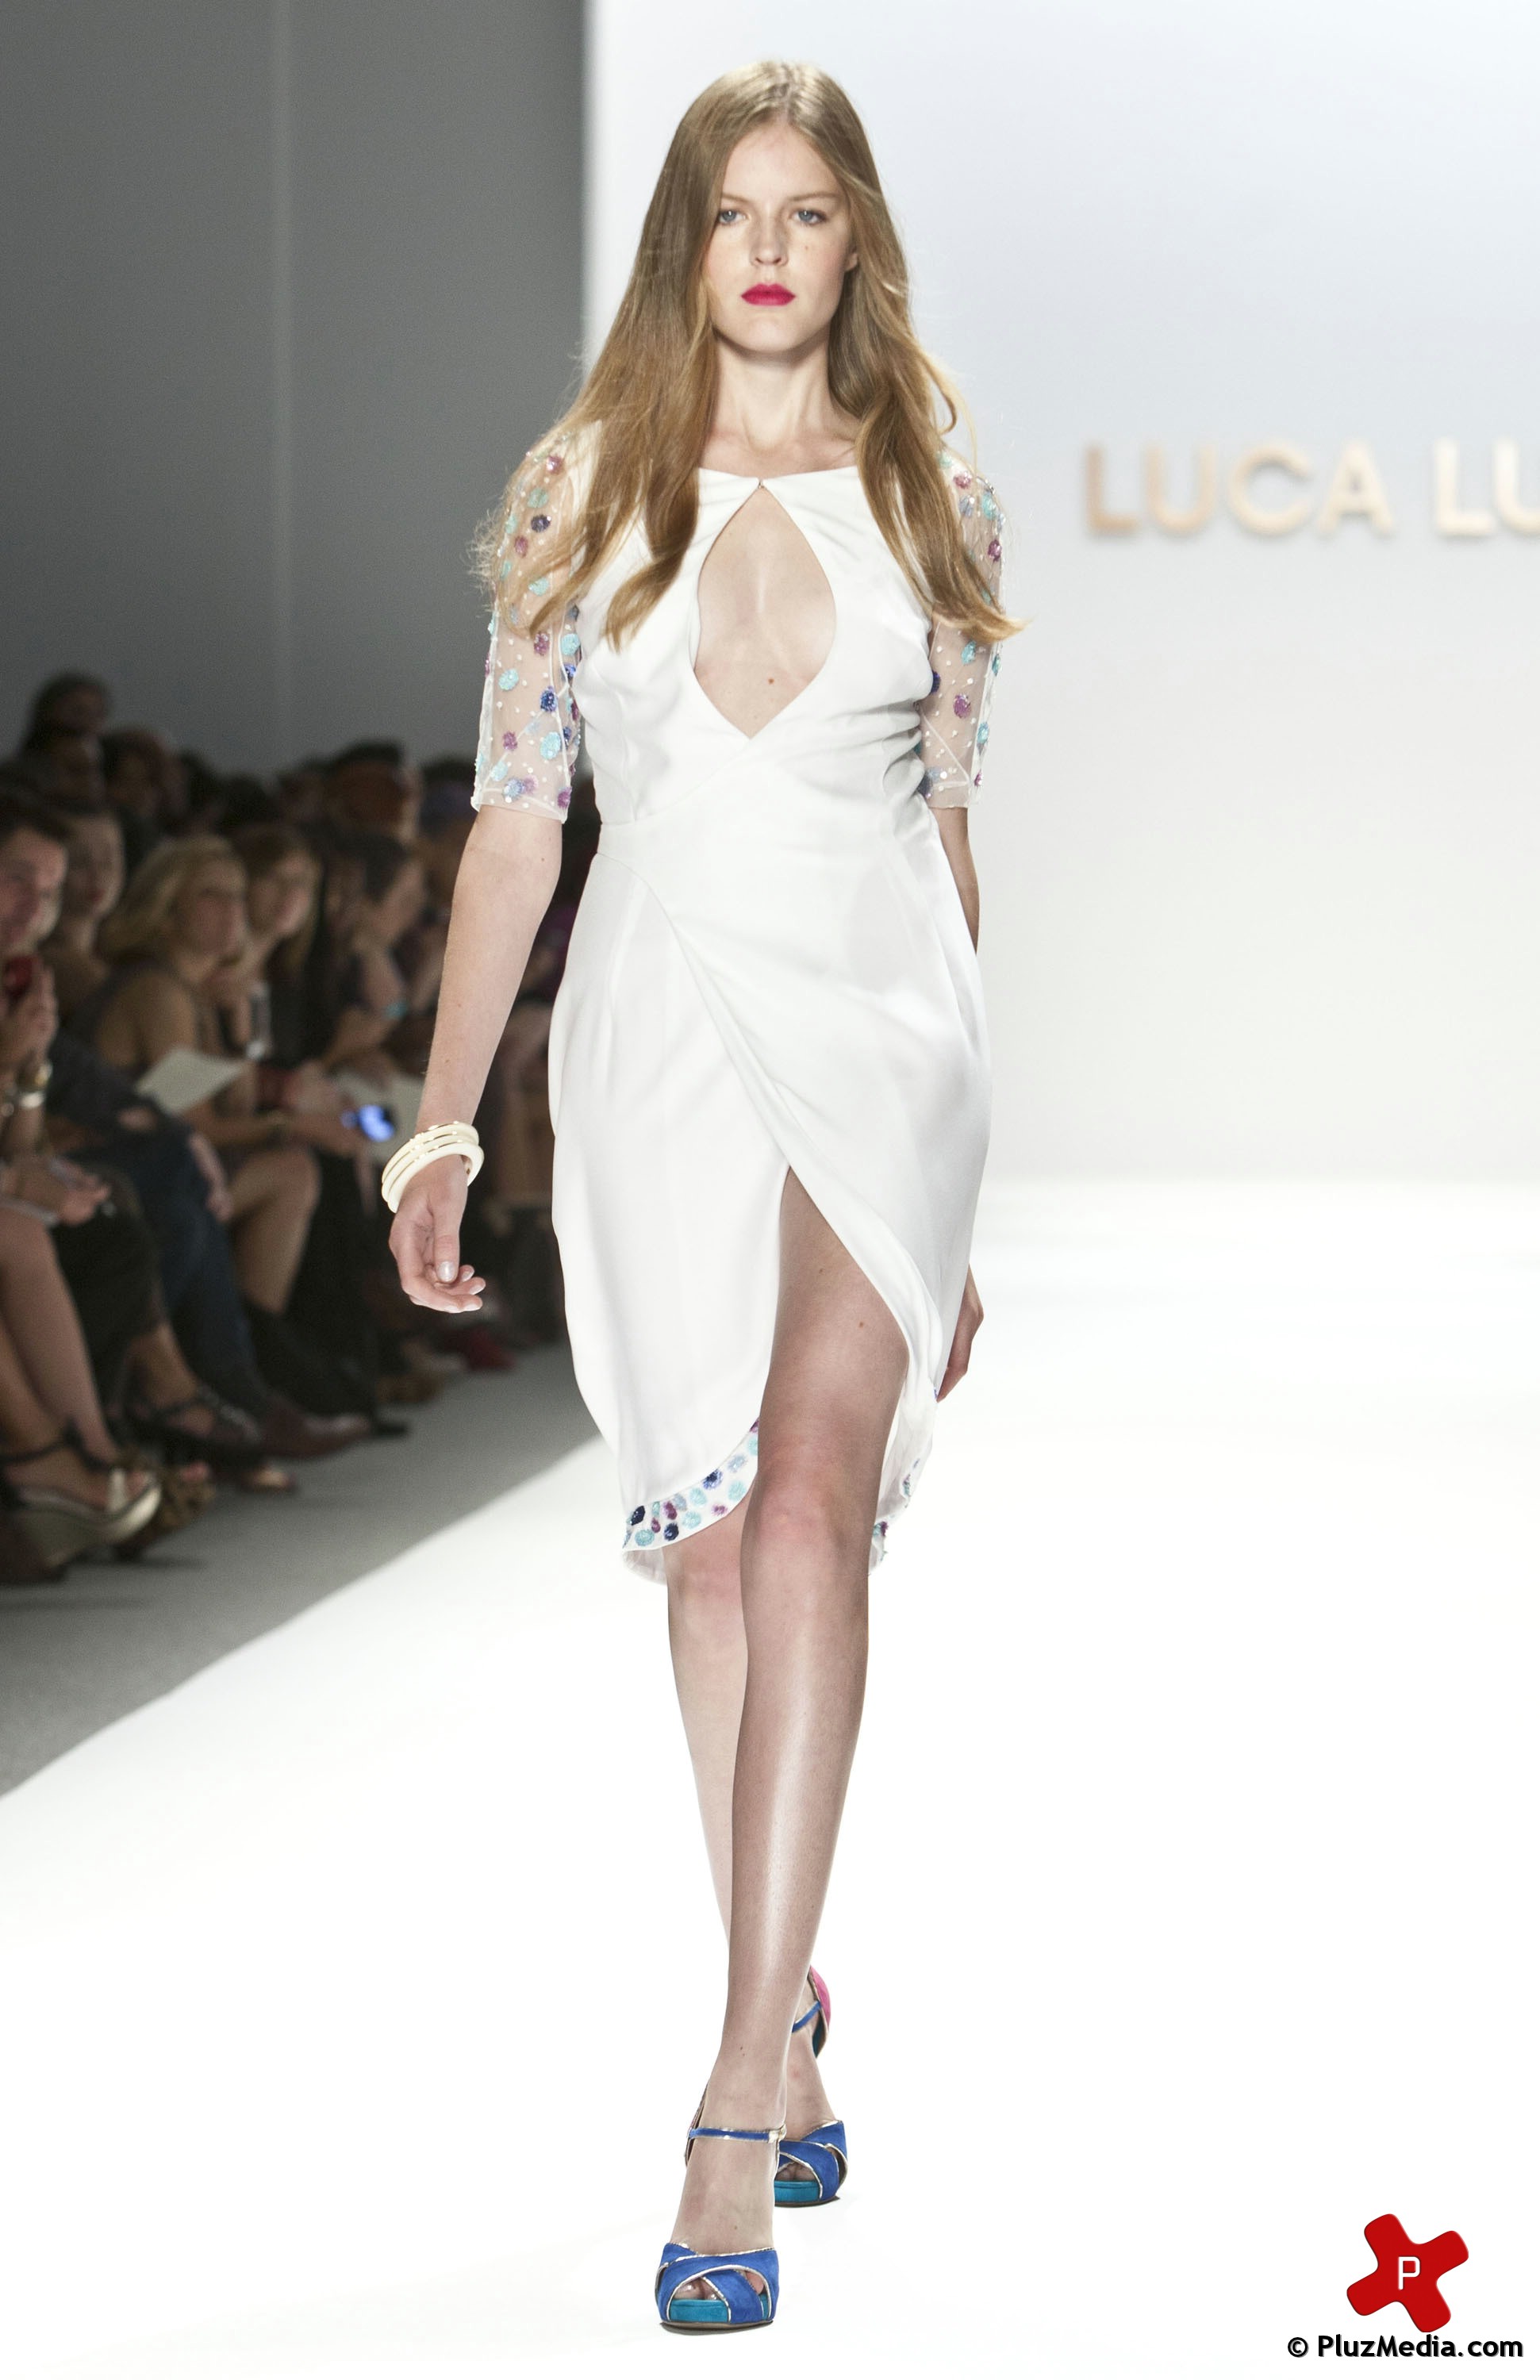 Mercedes Benz New York Fashion Week Spring 2012 - Luca Luca | Picture 74336